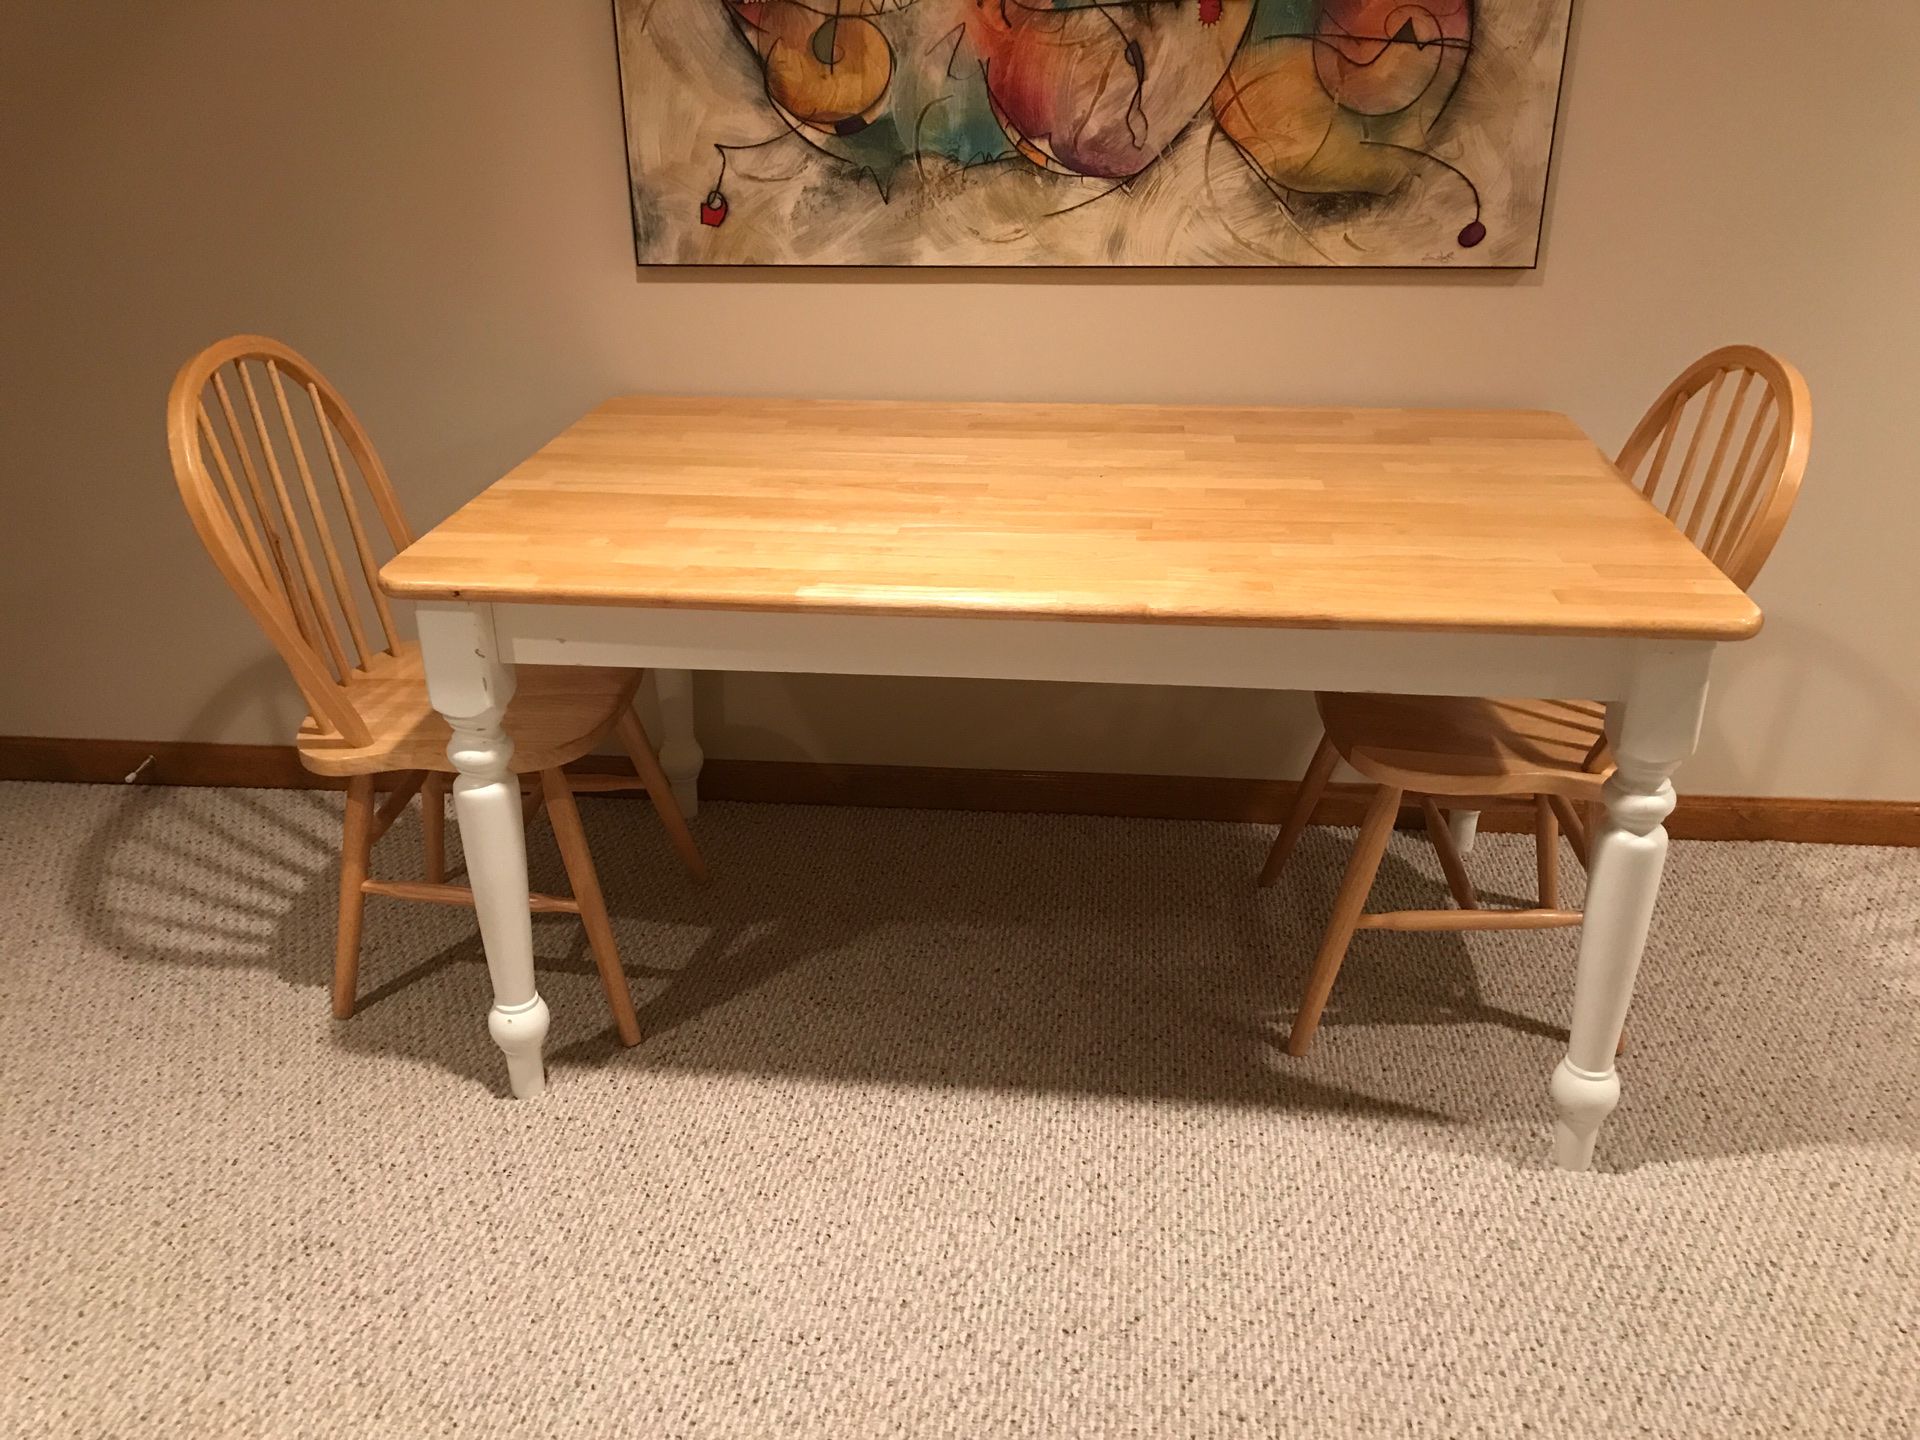 4 Chair Dinette table / kitchen table